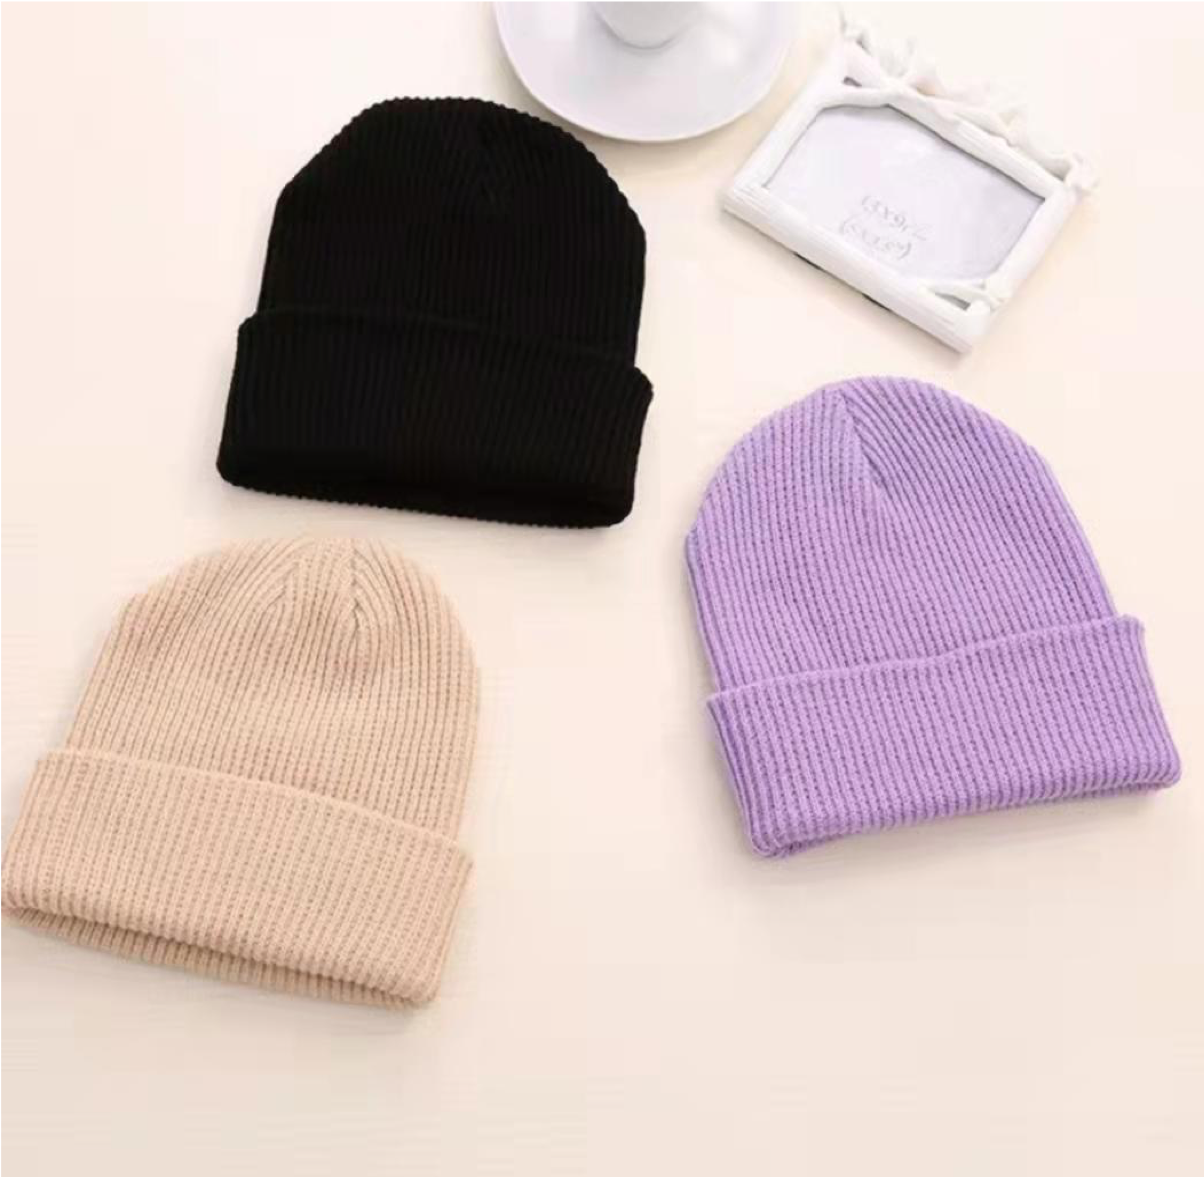 S1575 Adult Winter Hats Knitted-Design (Assorted) 1pc